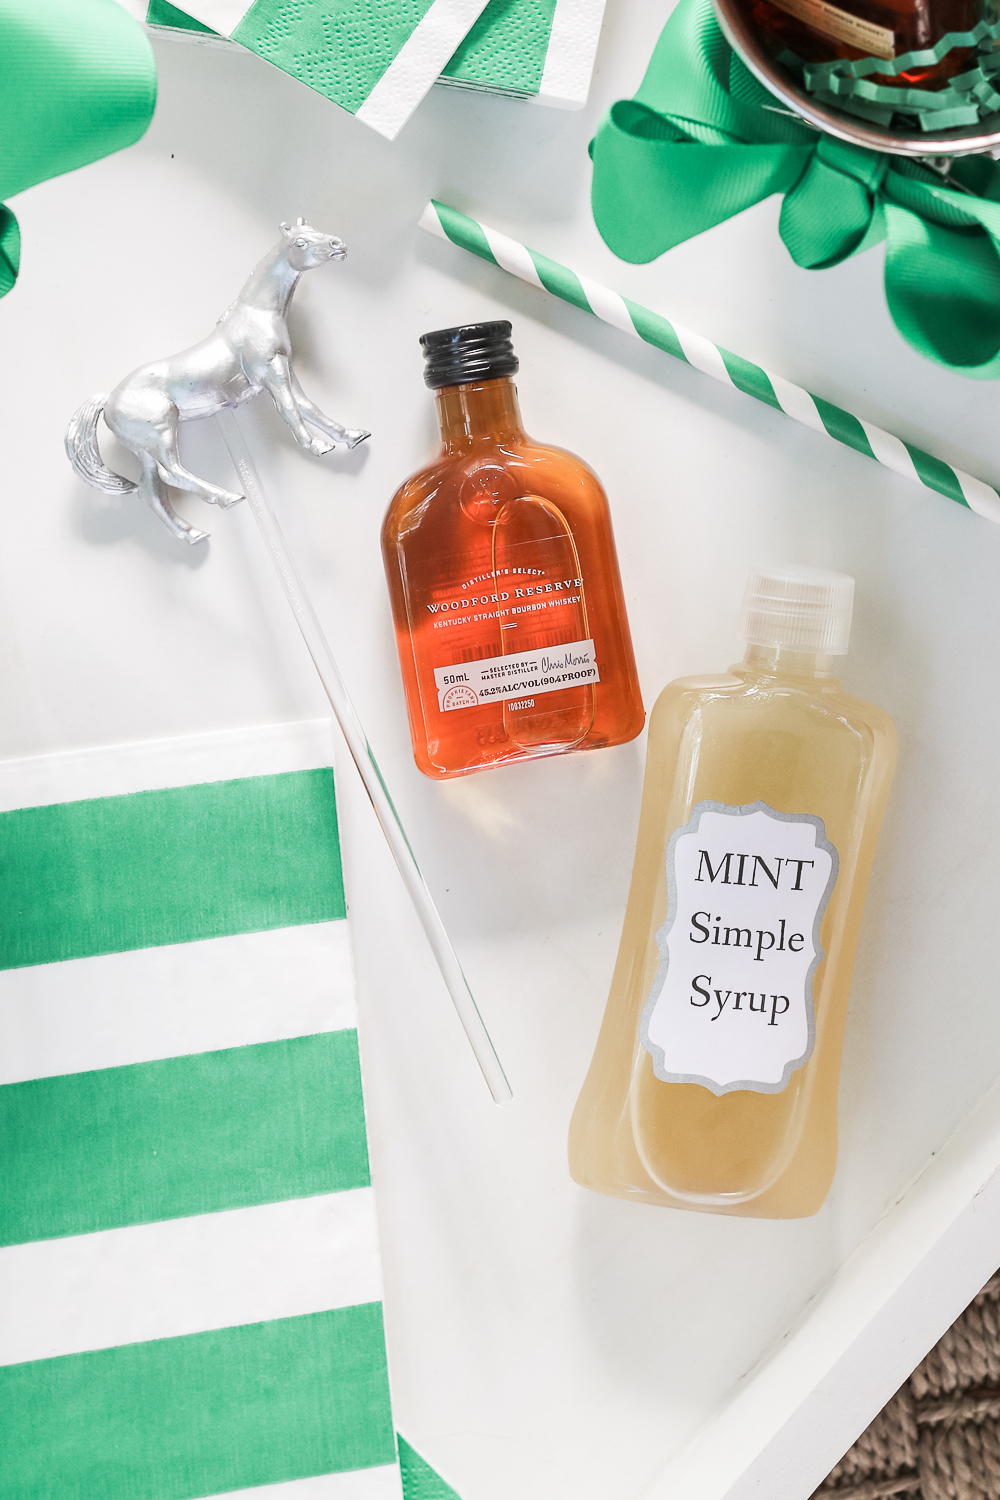 Derby Day Party Favor: DIY Mint Julep Kit by Stephanie Ziajka from the popular southern lifestyle blog Diary of a Debutante, mint julep gift set, cute Derby Day party favors, cute Kentucky Derby gift ideas, mini bottles of woodford reserve bourbon, homemade mint simple syrup